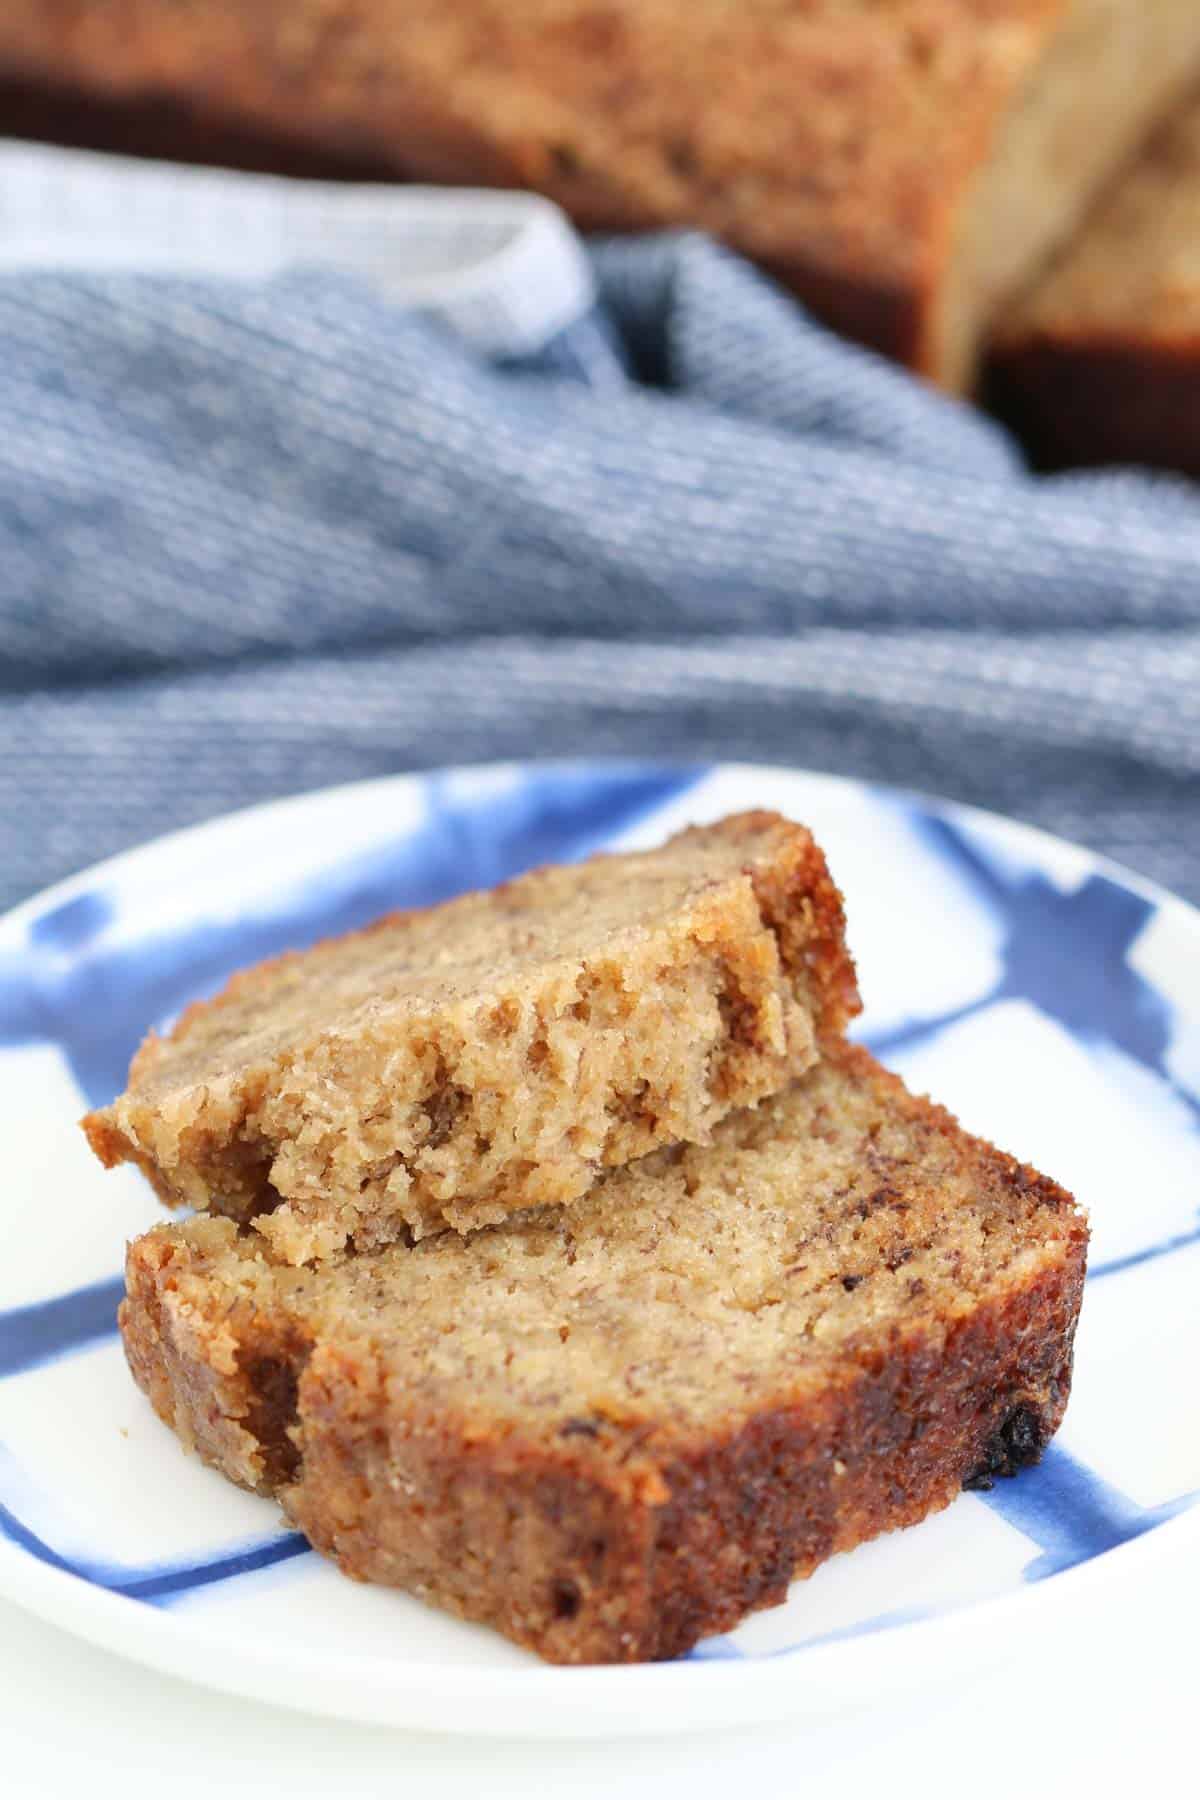 A close up of pieces of banana loaf on a blue and white plate.